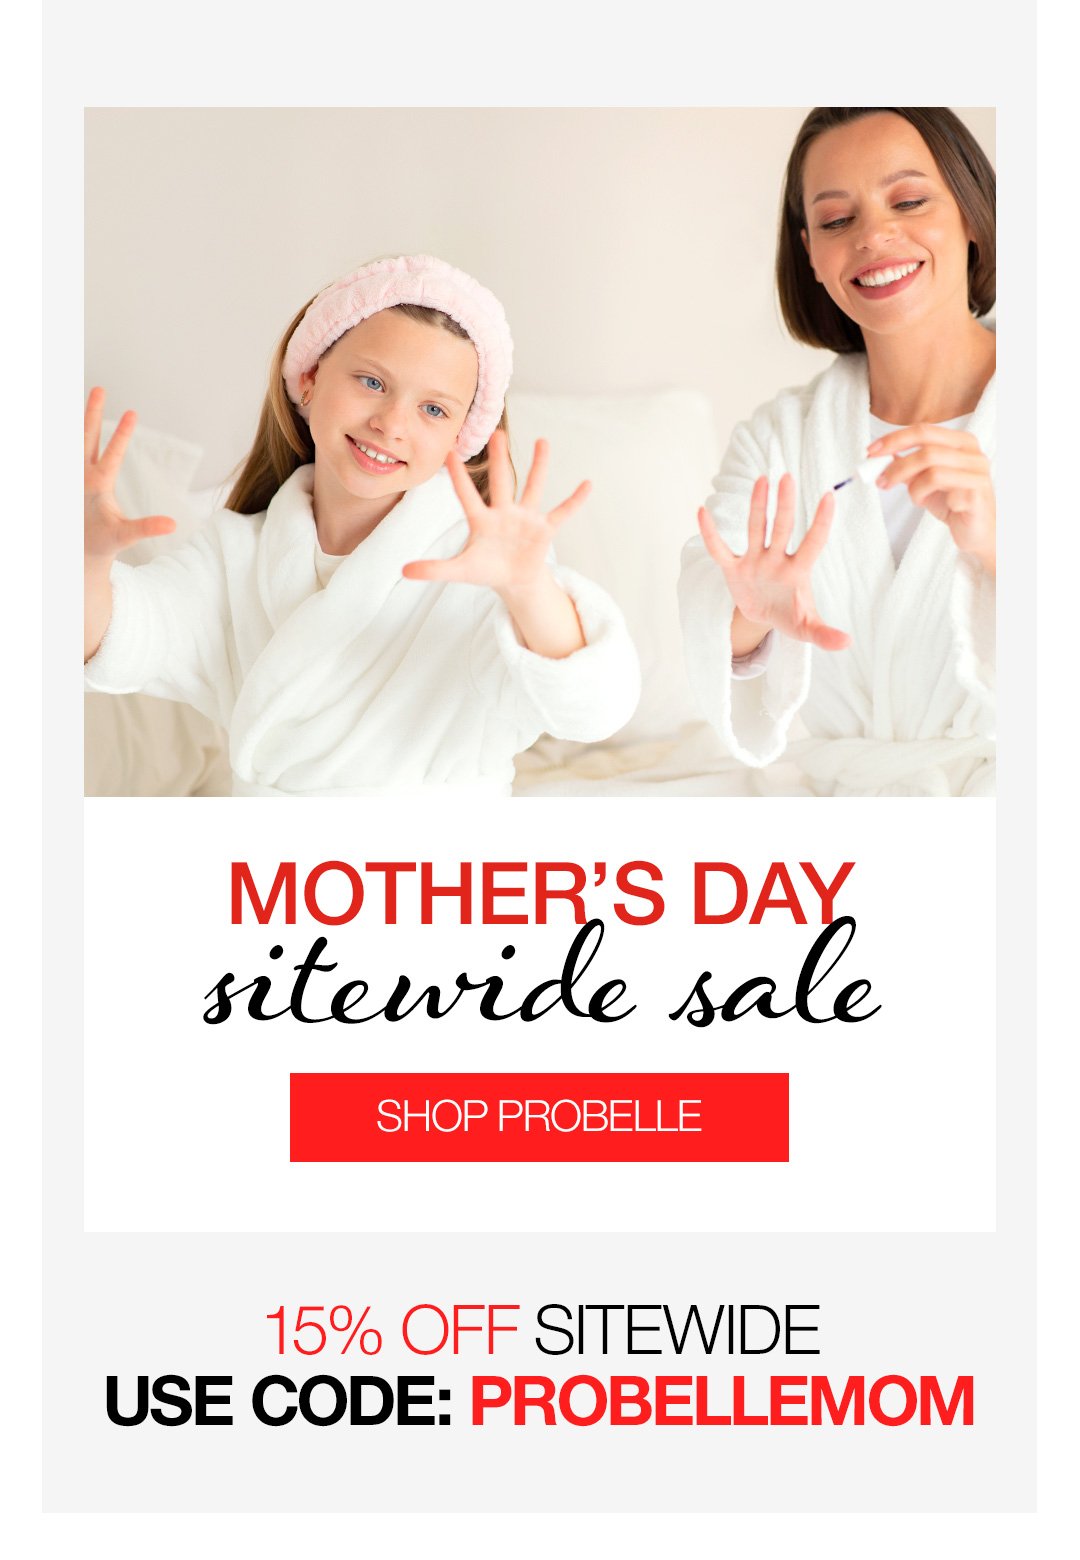 ENTER CODE "PROBELLEMOM" AT CHECKOUT TO SAVE 15% OFF SITEWIDE 5/1-5/14 SALE ENDS AT MIDNIGHT.